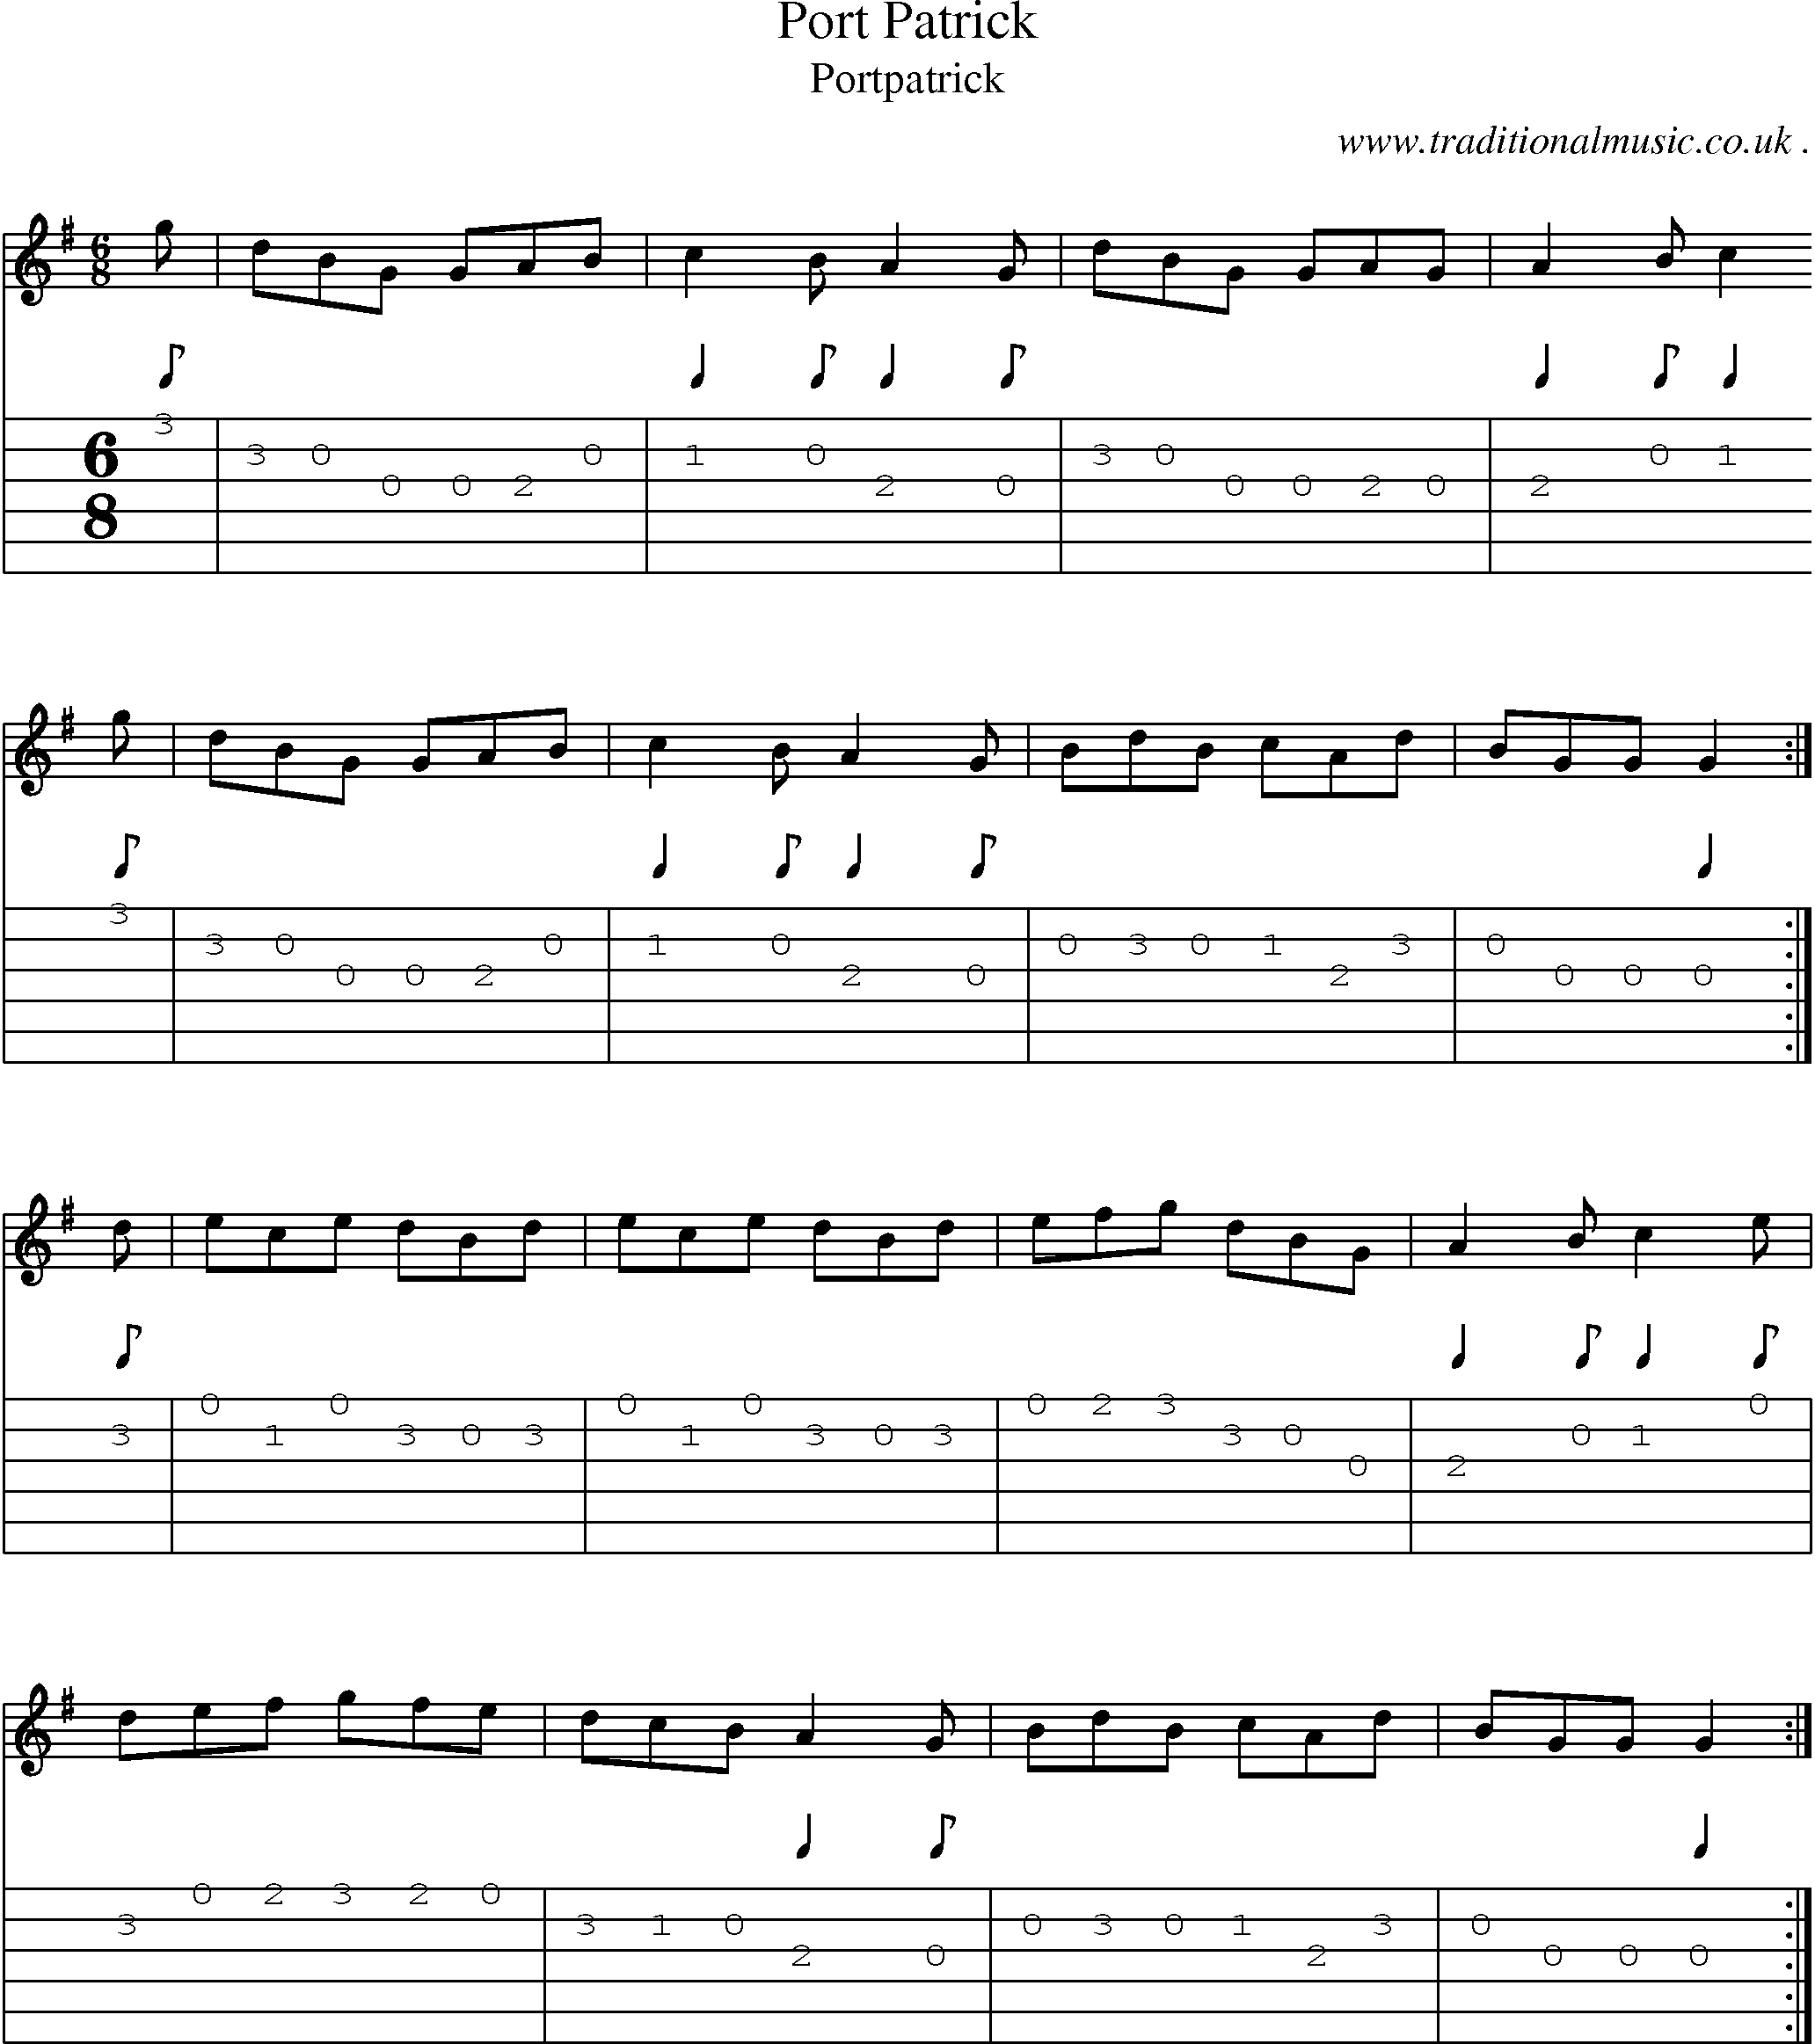 Sheet-music  score, Chords and Guitar Tabs for Port Patrick